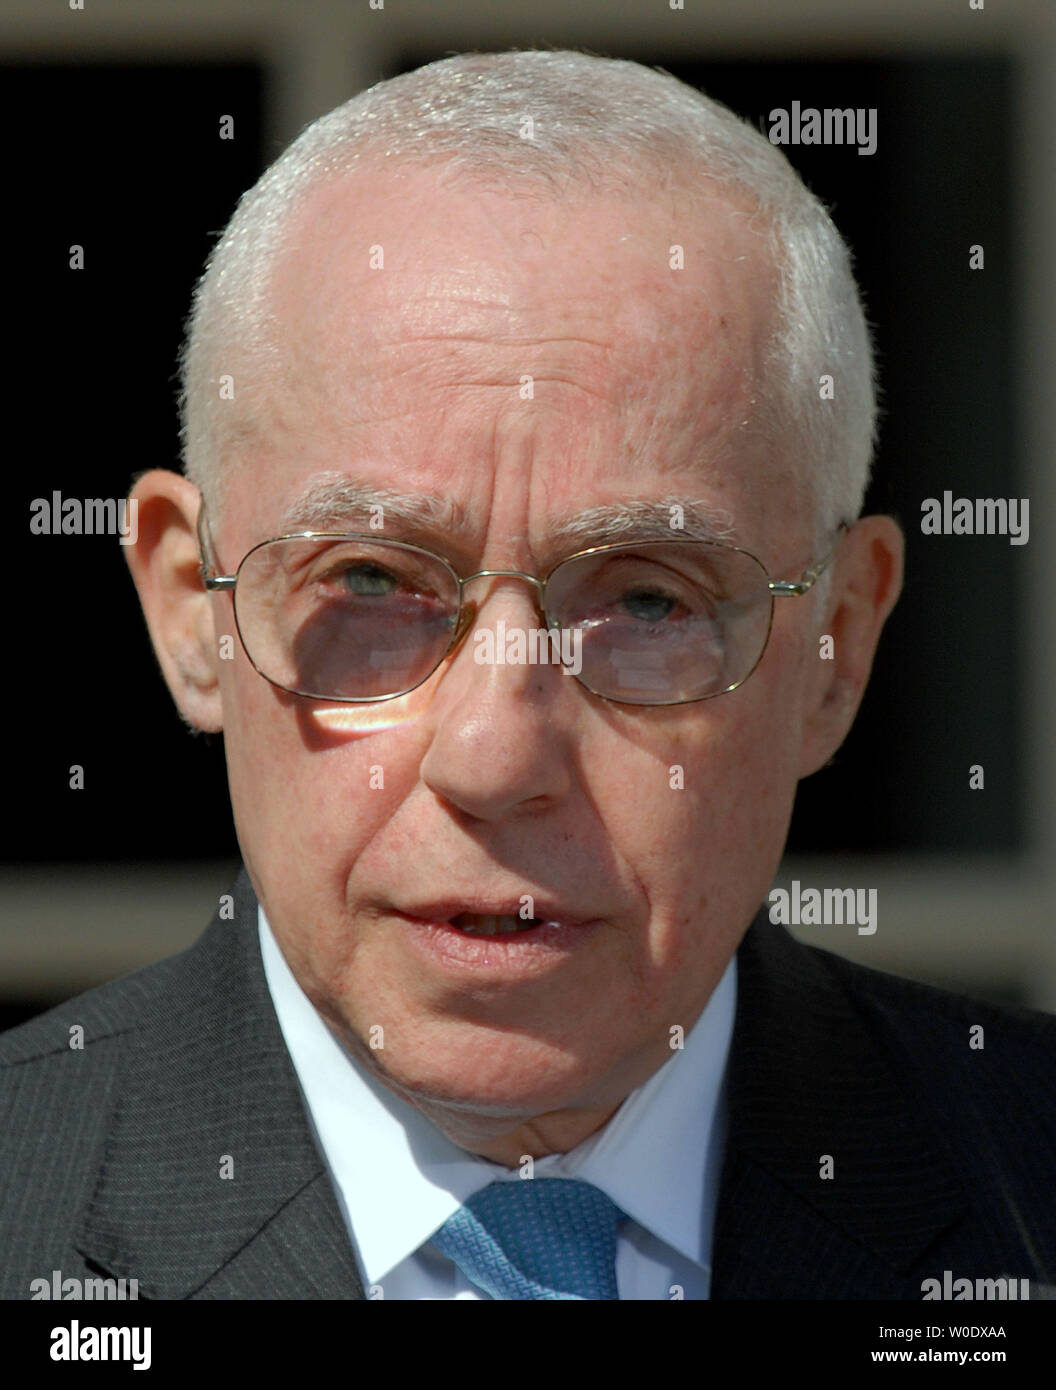 Michael B. Mukasey, a retired federal judge from New York, speaks after U.S. President George W. Bush announced his nomination of Mukasey to replace Alberto Gonzales as attorney general in the Rose Garden of the White House on September 17, 2007.   (UPI Photo/Roger L. Wollenberg) Stock Photo